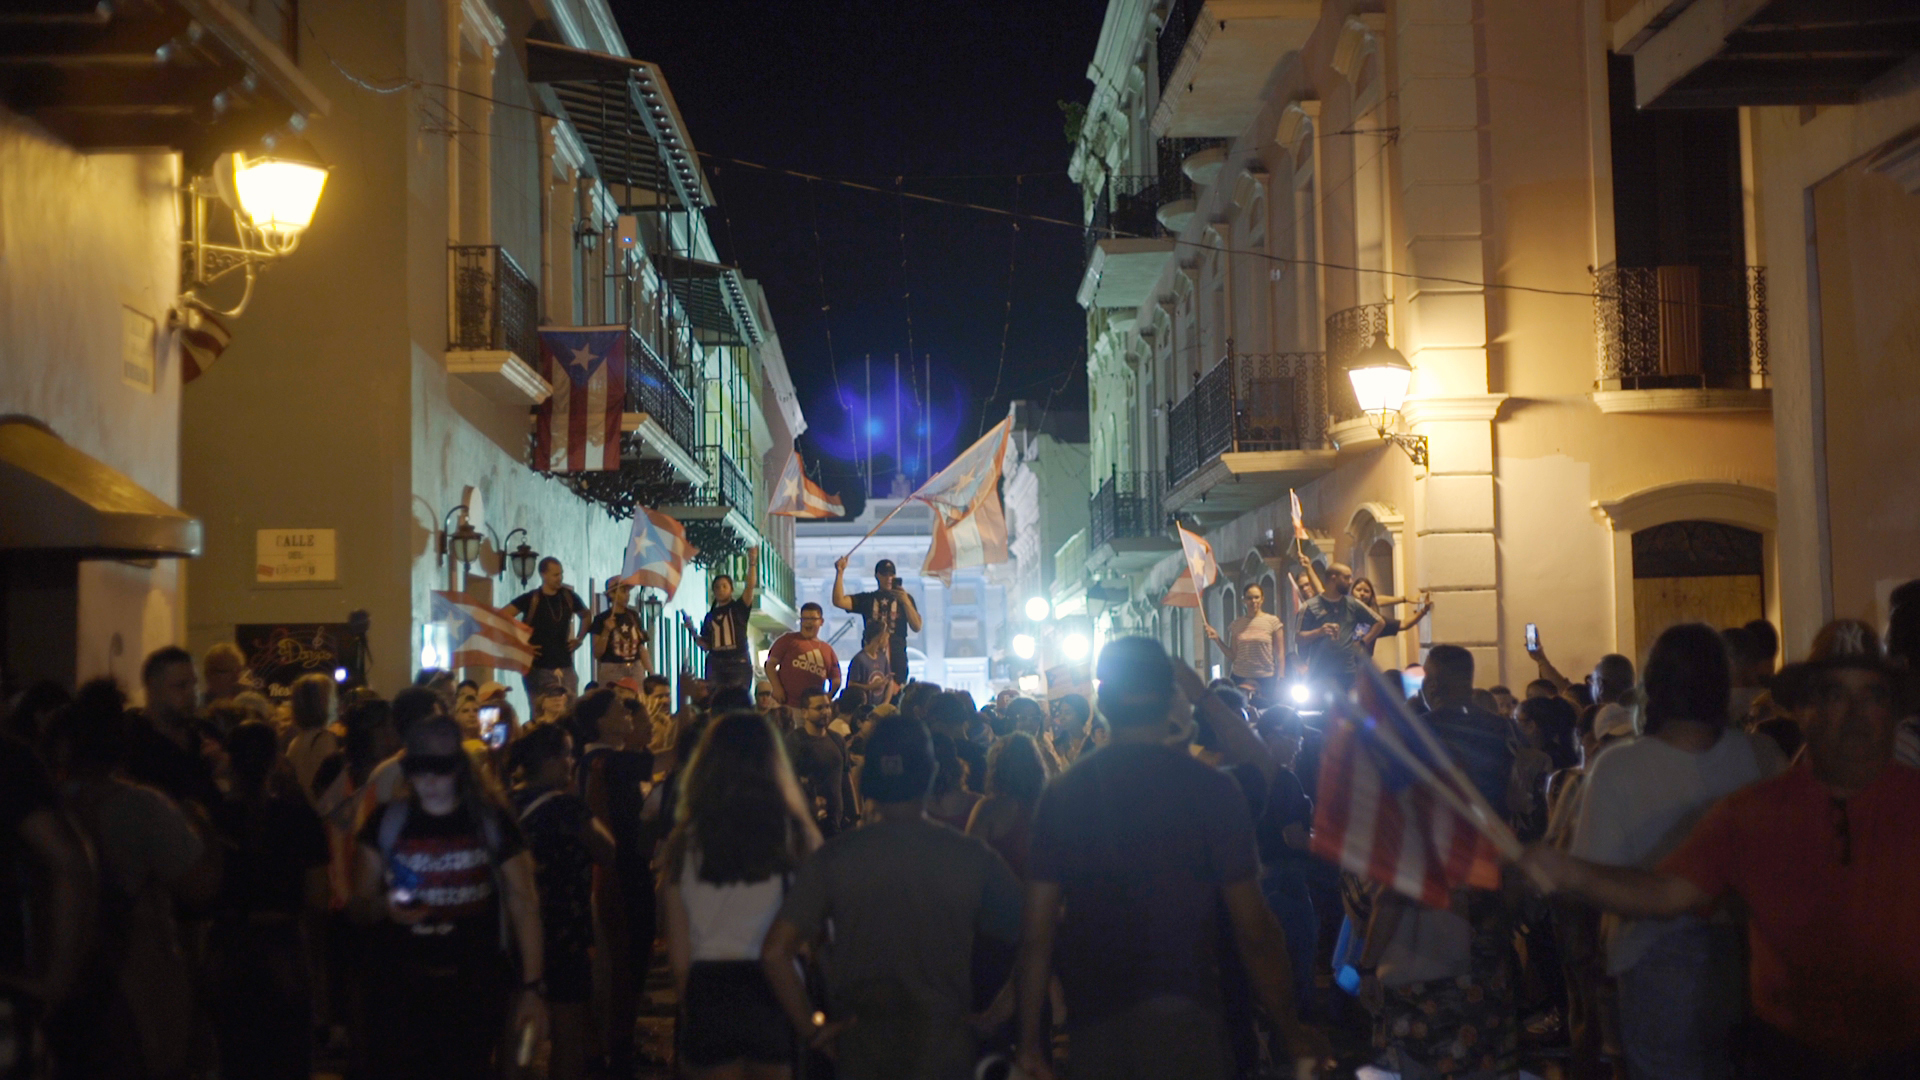 A crowd of people gather in the street, in the center of the frame is a person waving a flag